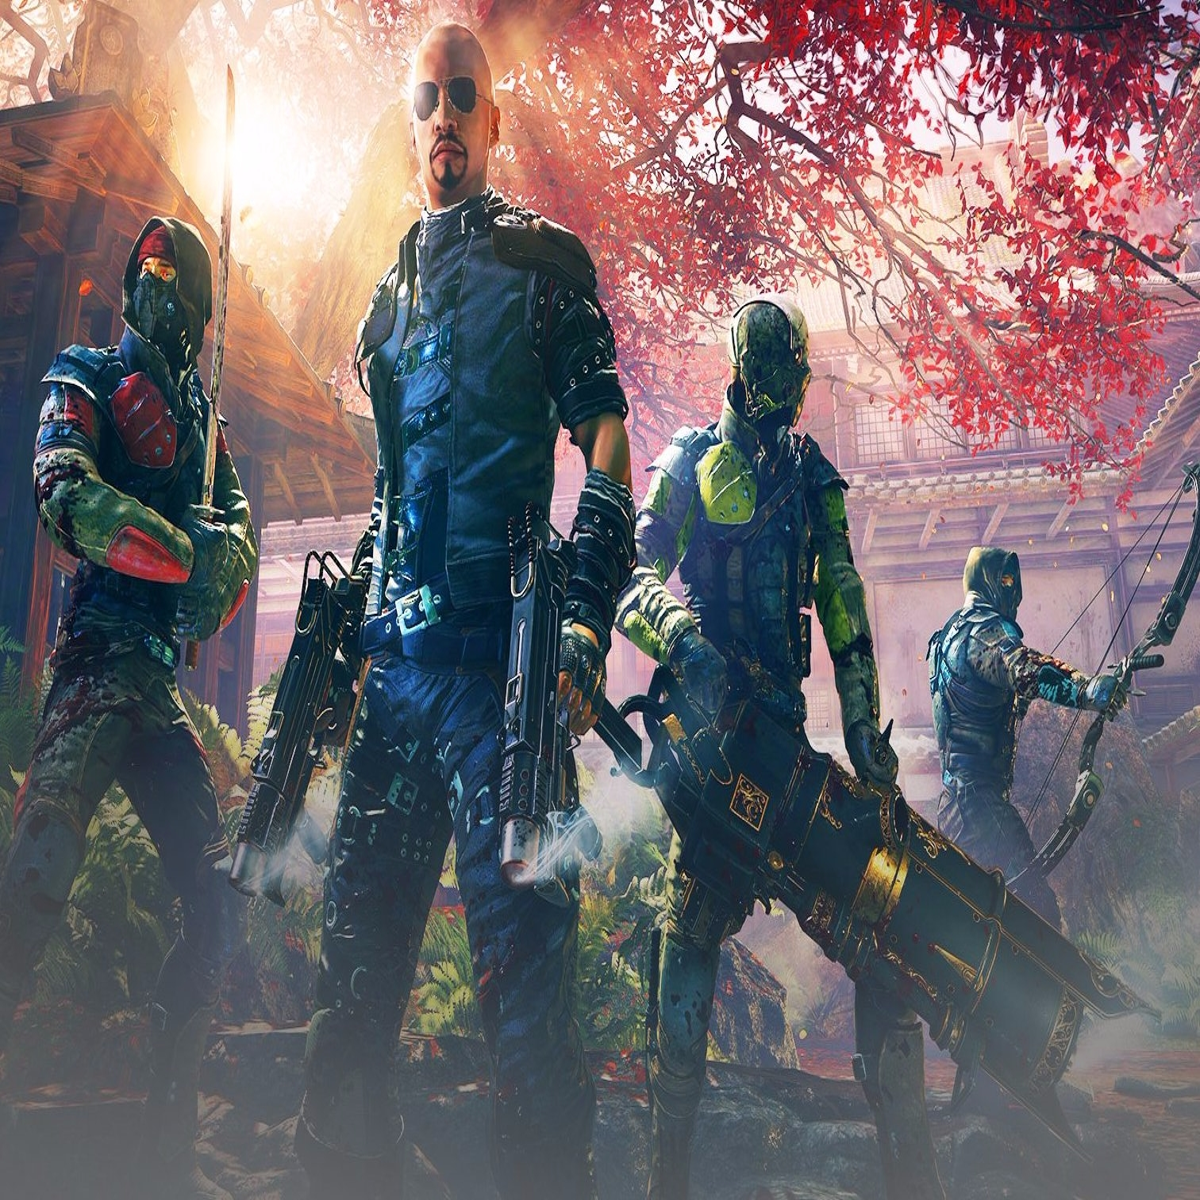 Announcement - THE WANG STRIKES BACK IN SHADOW WARRIOR 2 COMING FOR PC, XB1  and PS4 - Impulse Gamer